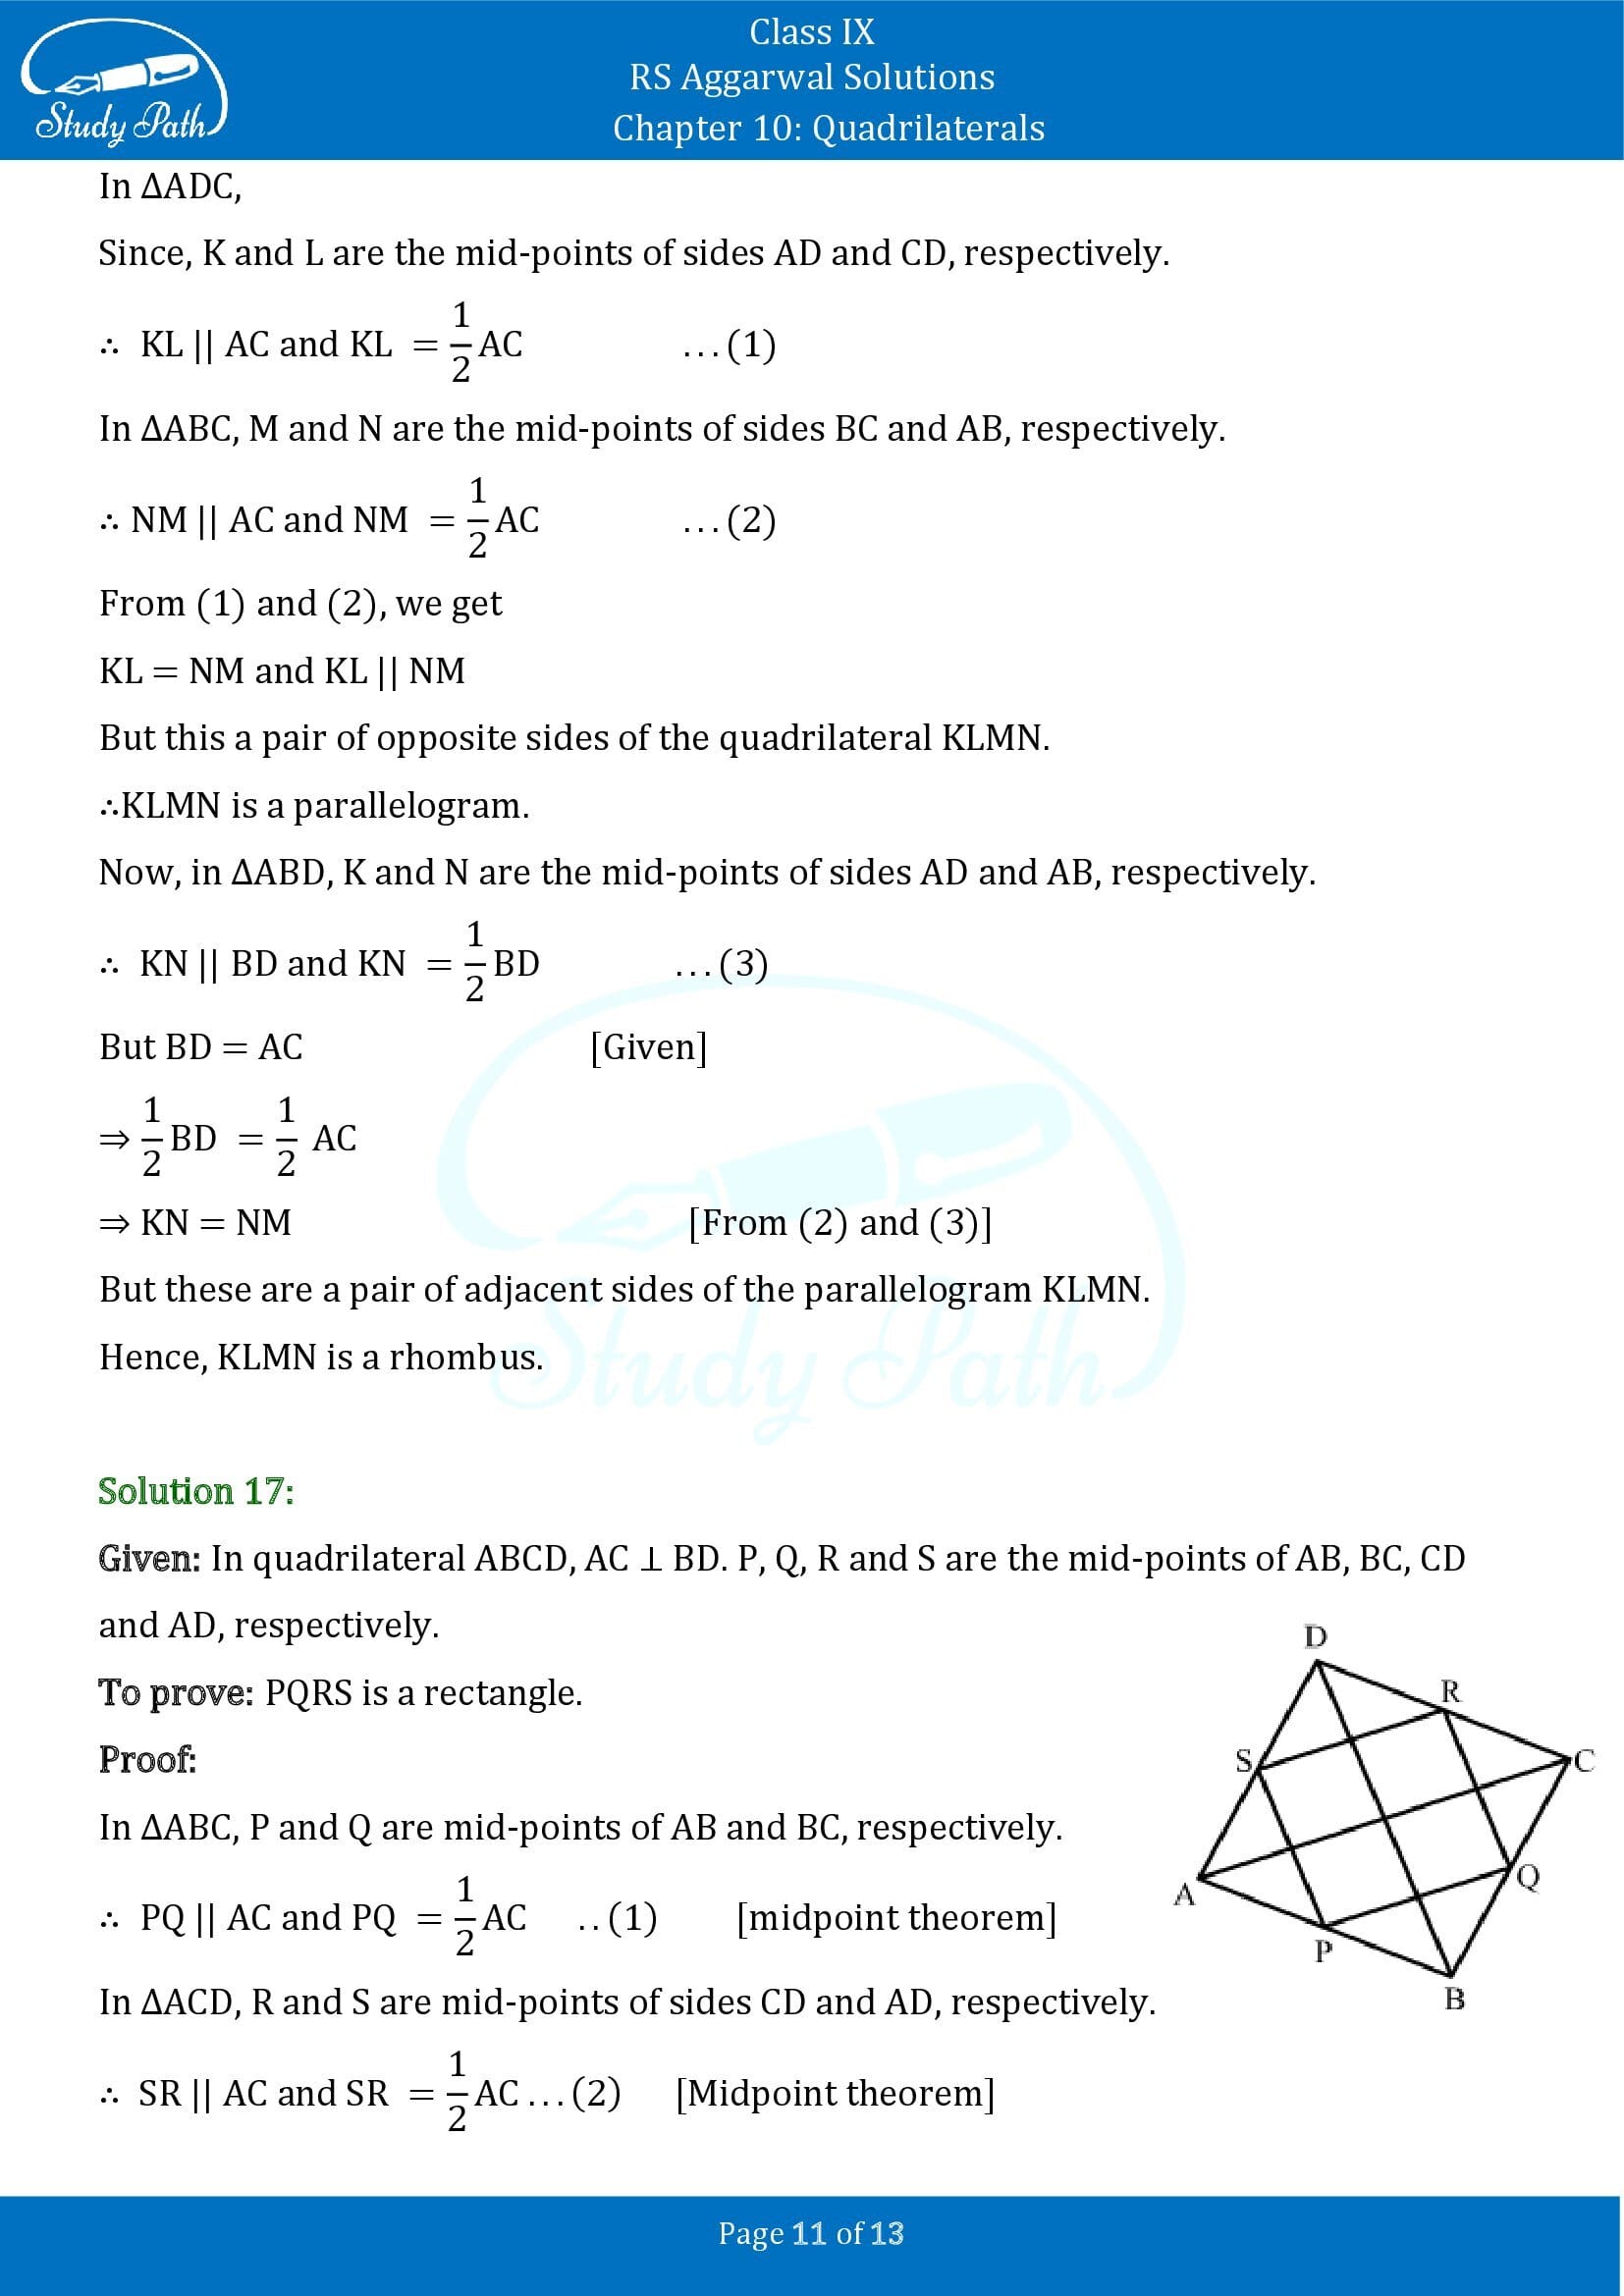 RS Aggarwal Solutions Class 9 Chapter 10 Quadrilaterals Exercise 10C 00011